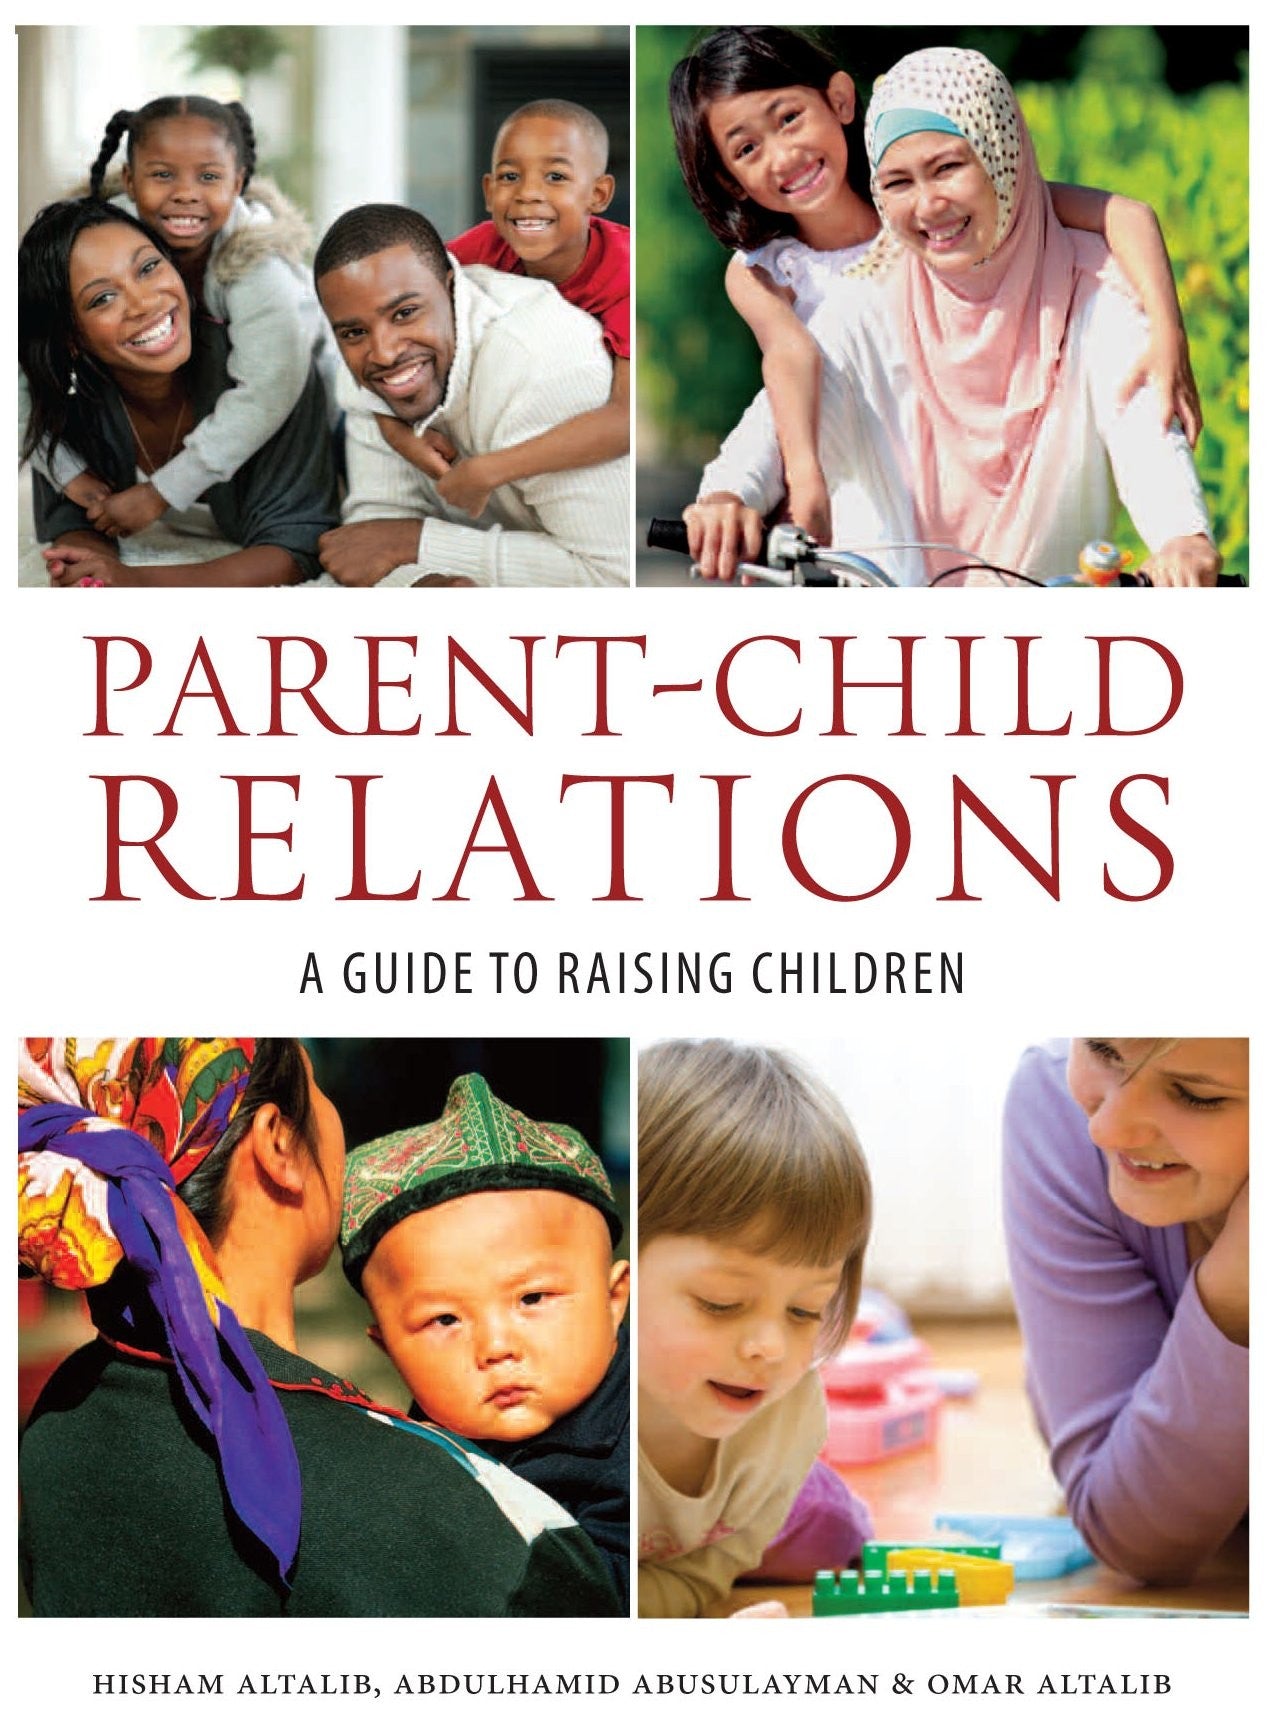 Parent-Child Relations: A Guide to Raising Children International Institute of Islamic Thought